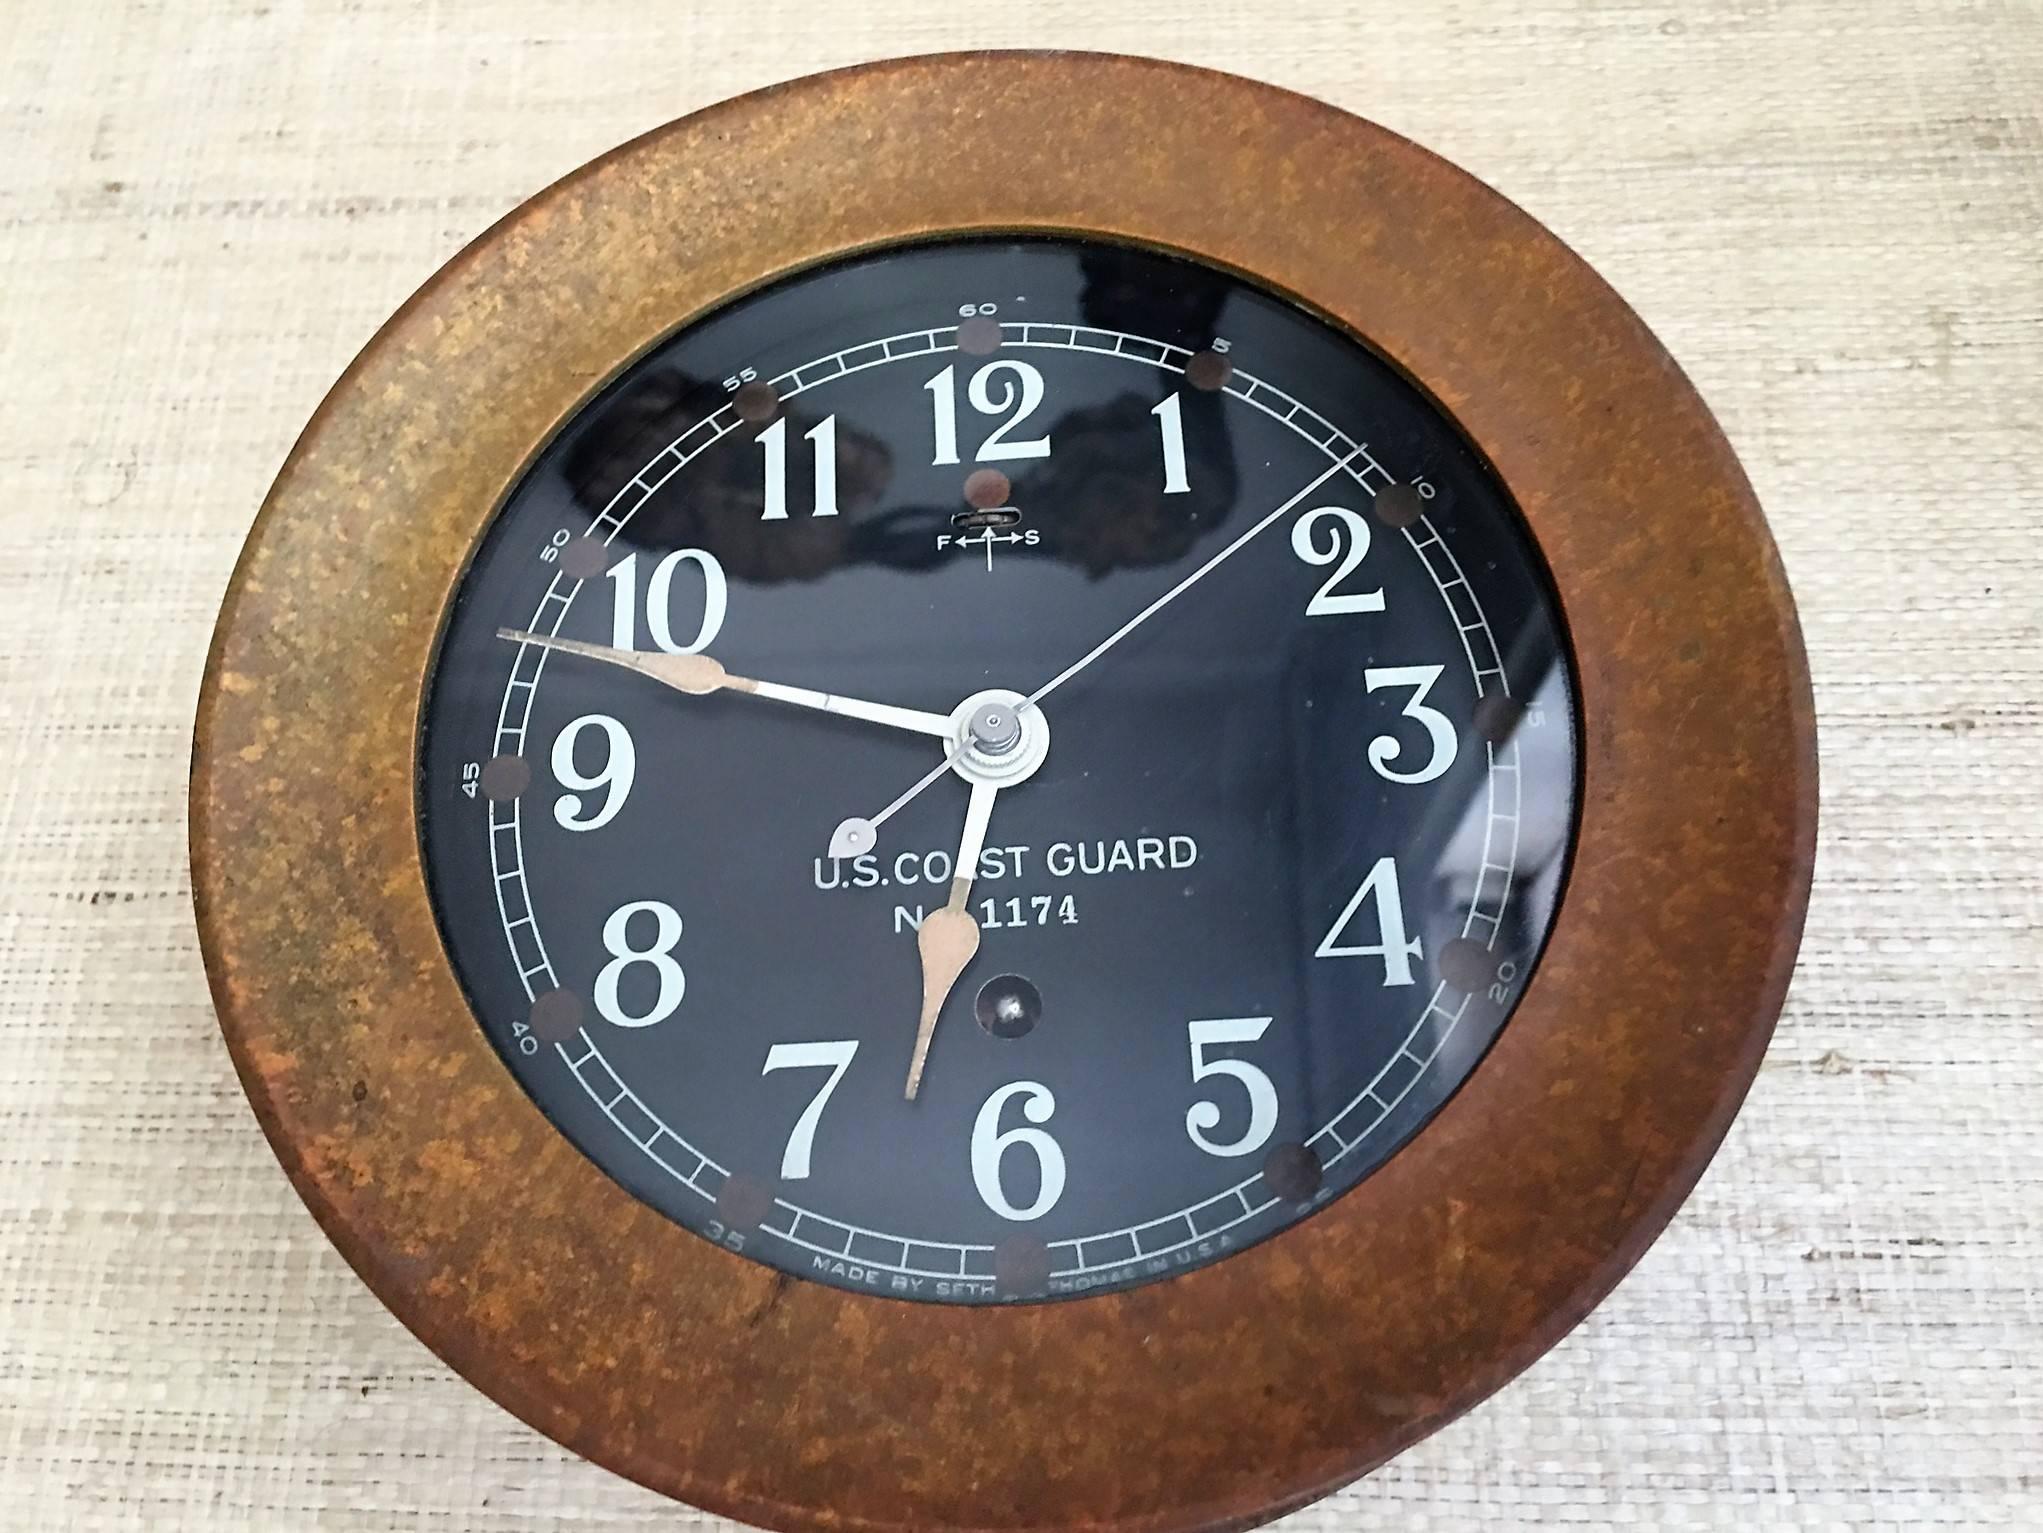 Substantial bronze black faced Chelsea ship clock in good working condition.
Would be an interesting addition to add some Naval and Historical mix to an Eclectic Den Wall.